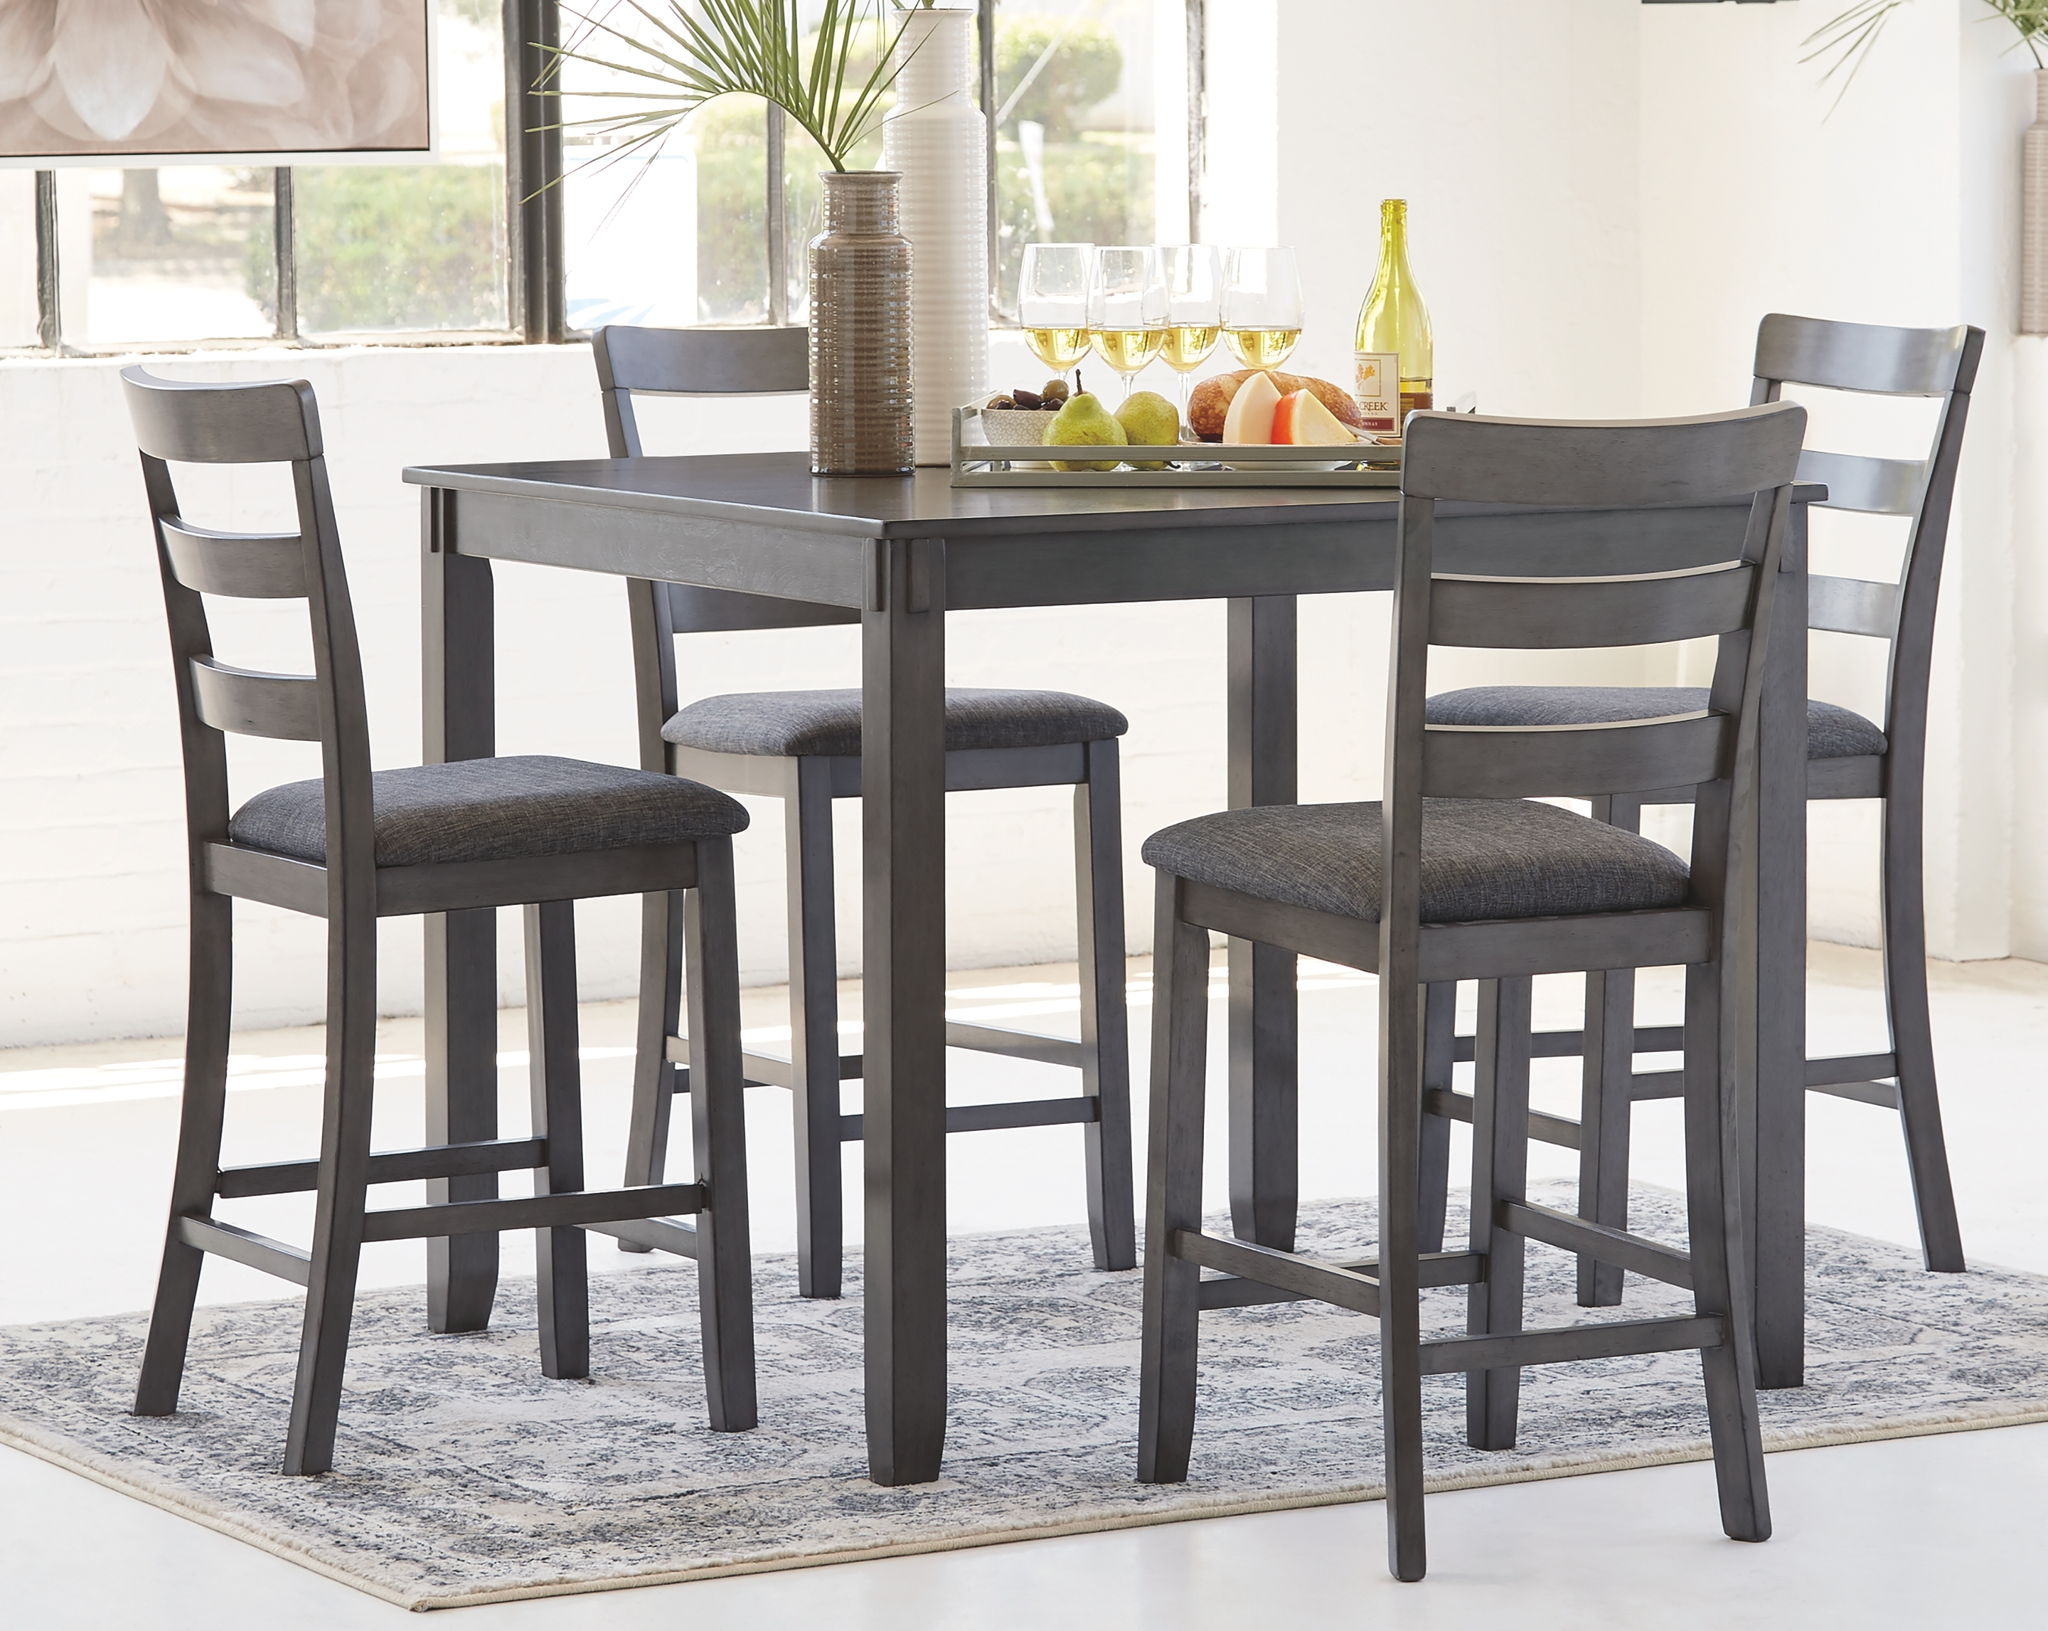 Dining Room Set With Bar Stools